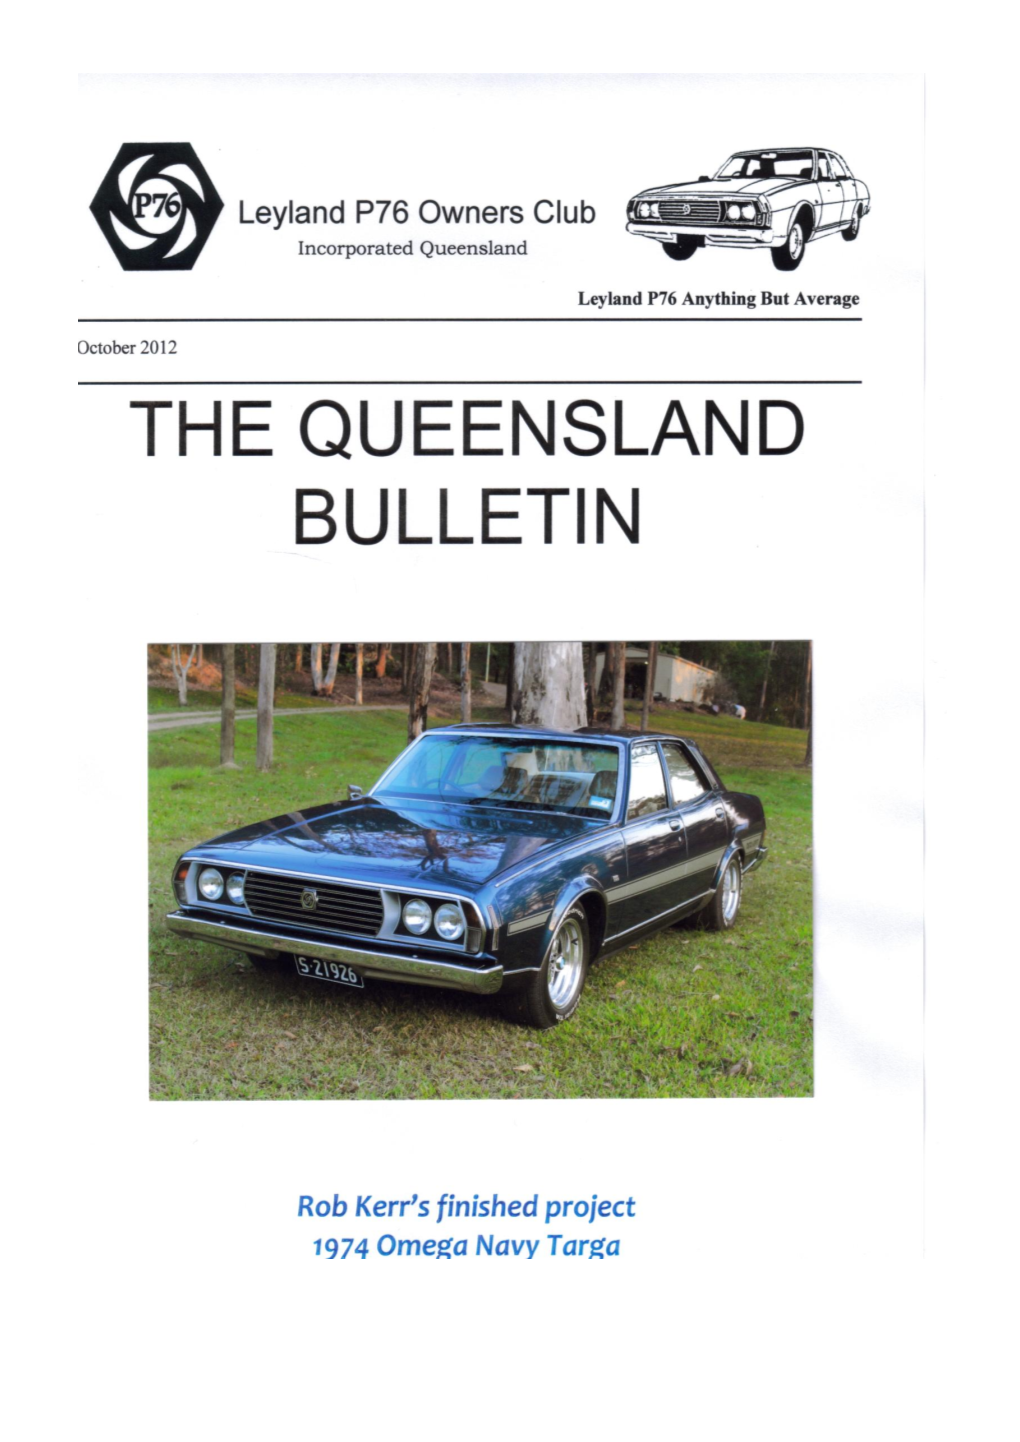 Leyland P76 Owners Club of Queensland